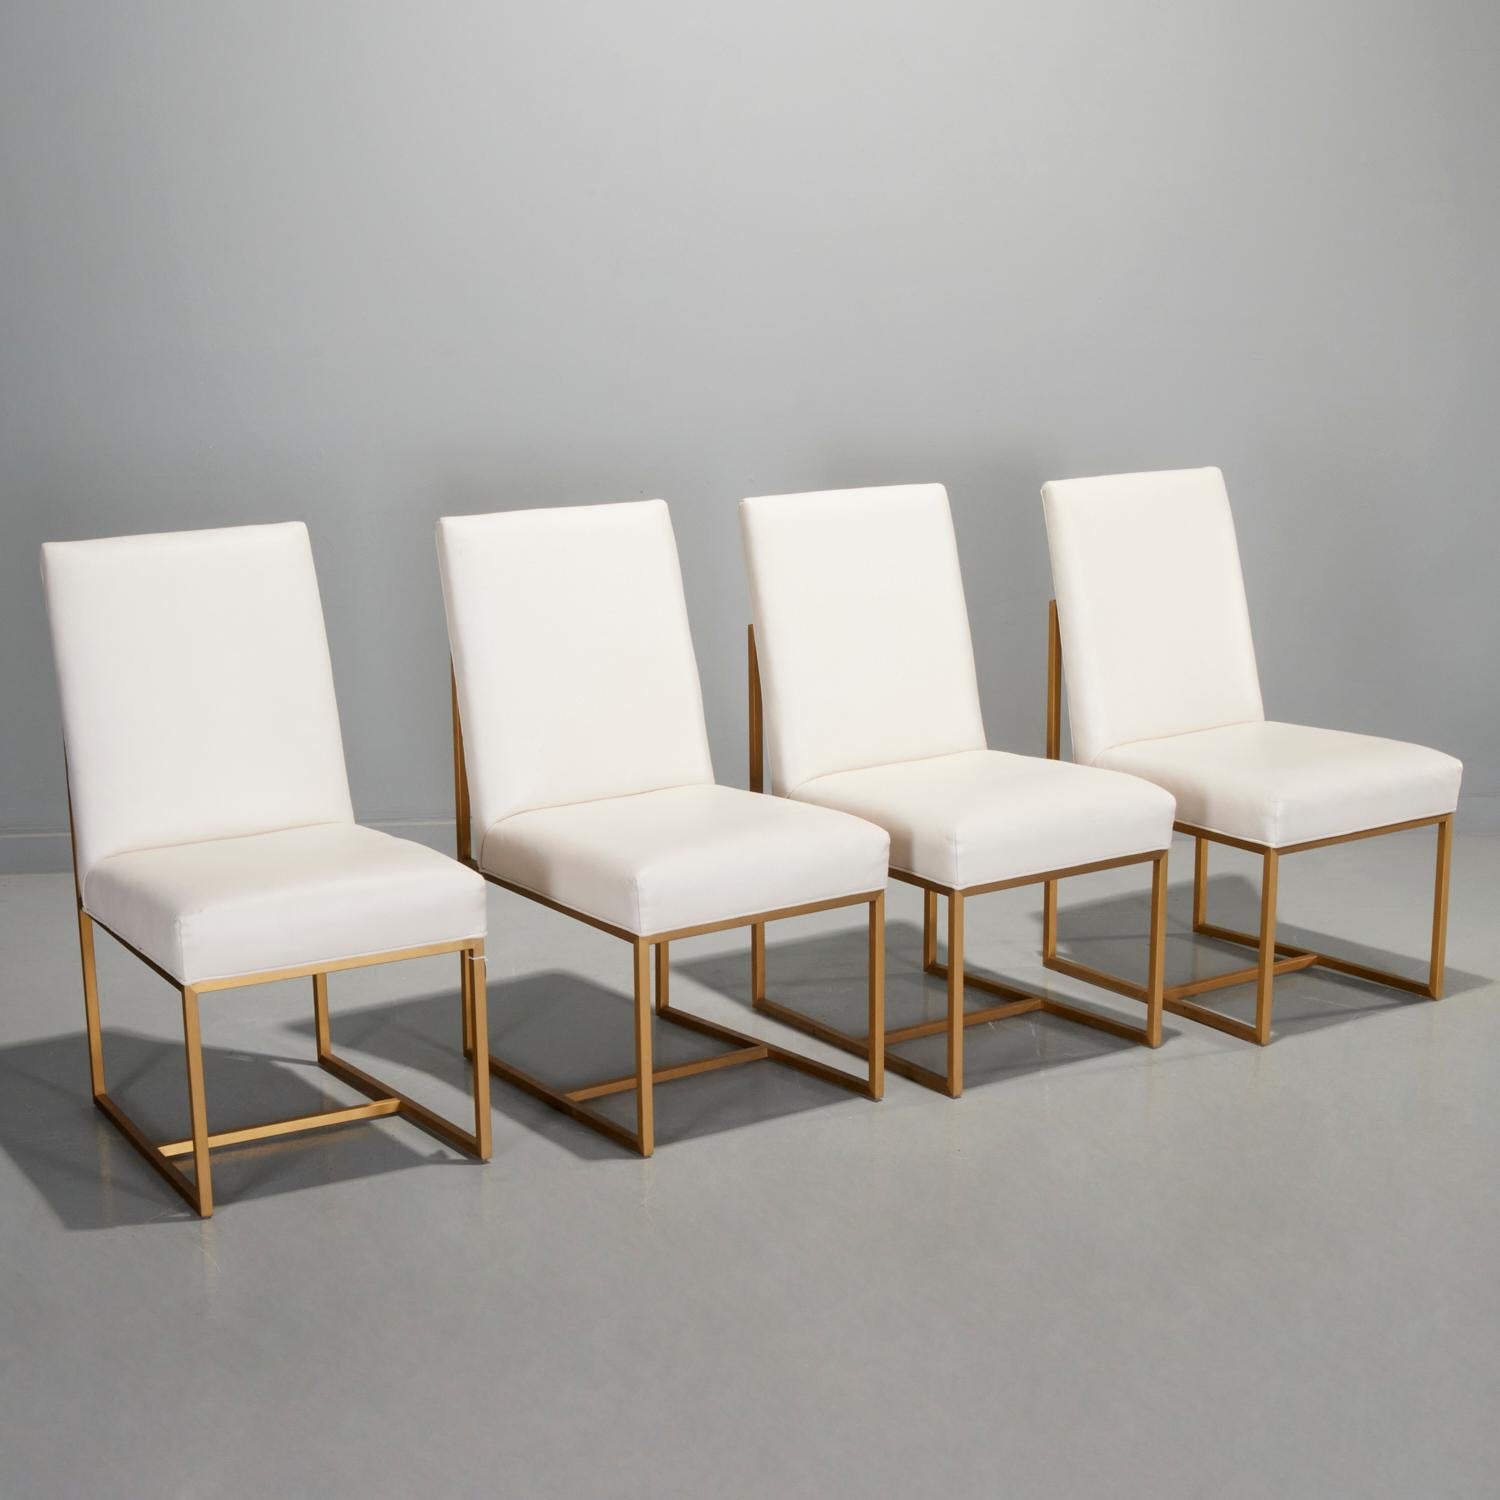 Contemporary 21st C. 4 White Leather and Gilt Metal Side Chairs - Style of Milo Baughman For Sale